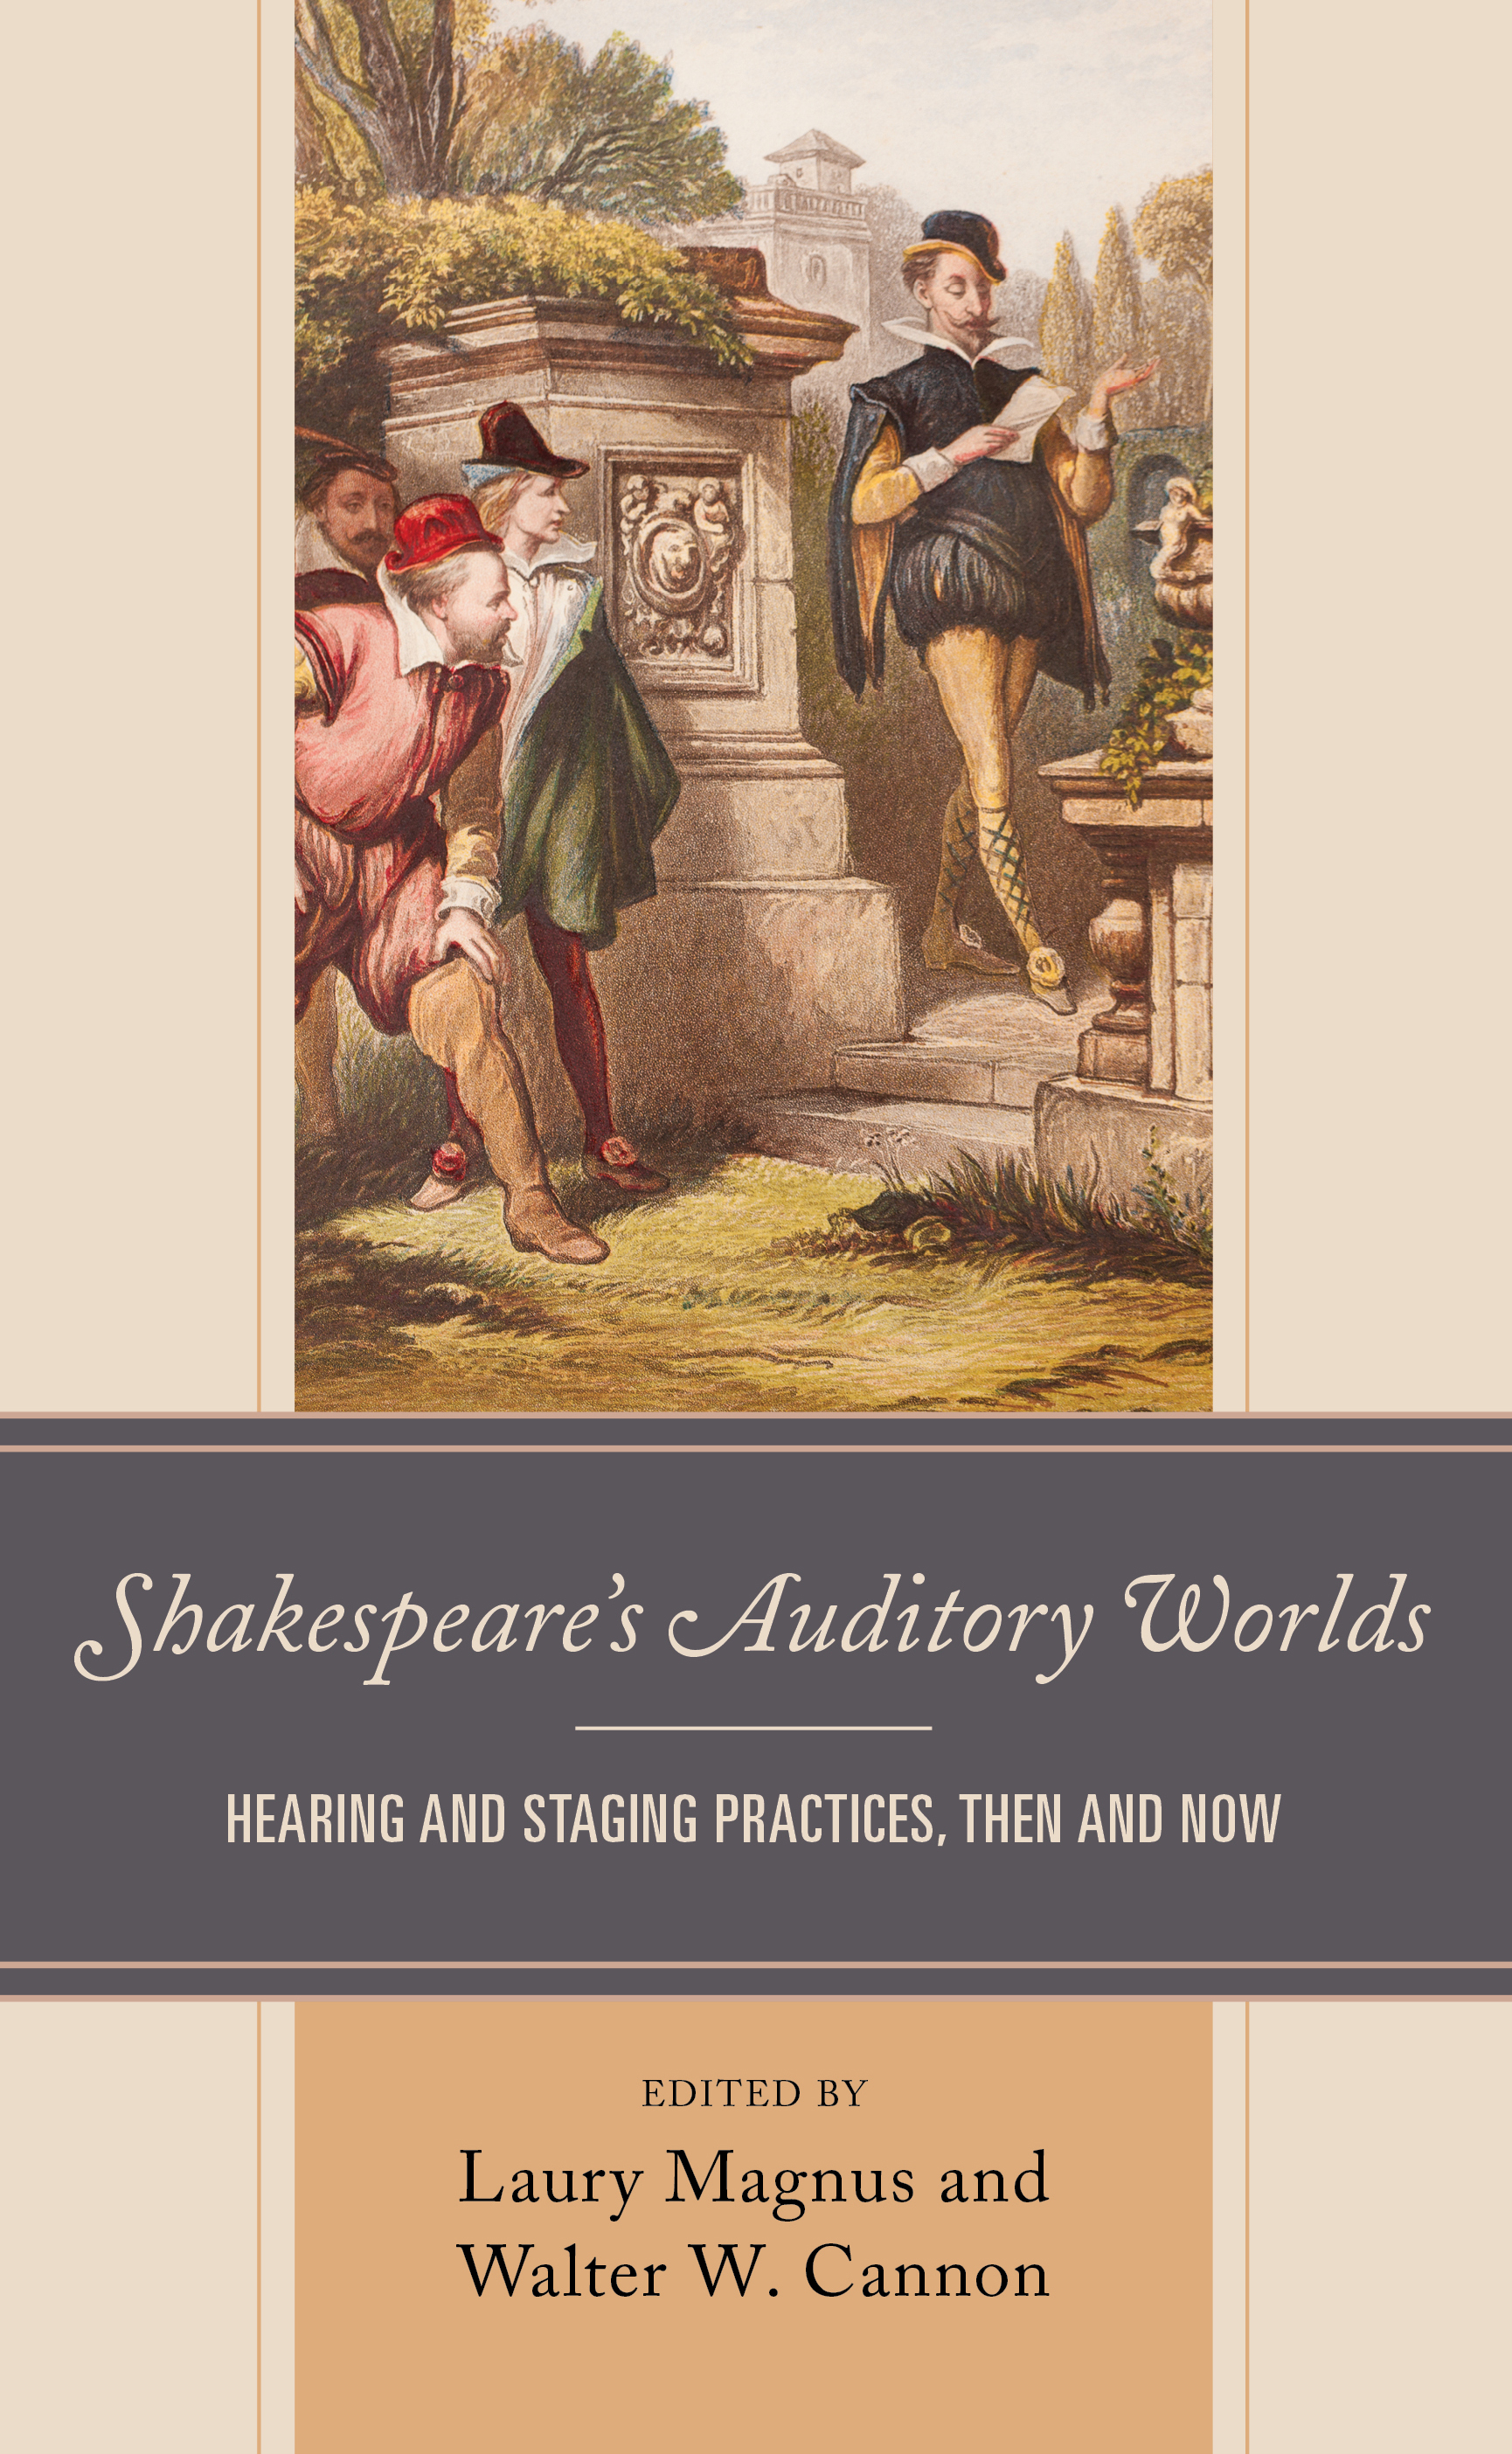 Shakespeare’s Auditory Worlds: Hearing and Staging Practices, Then and Now